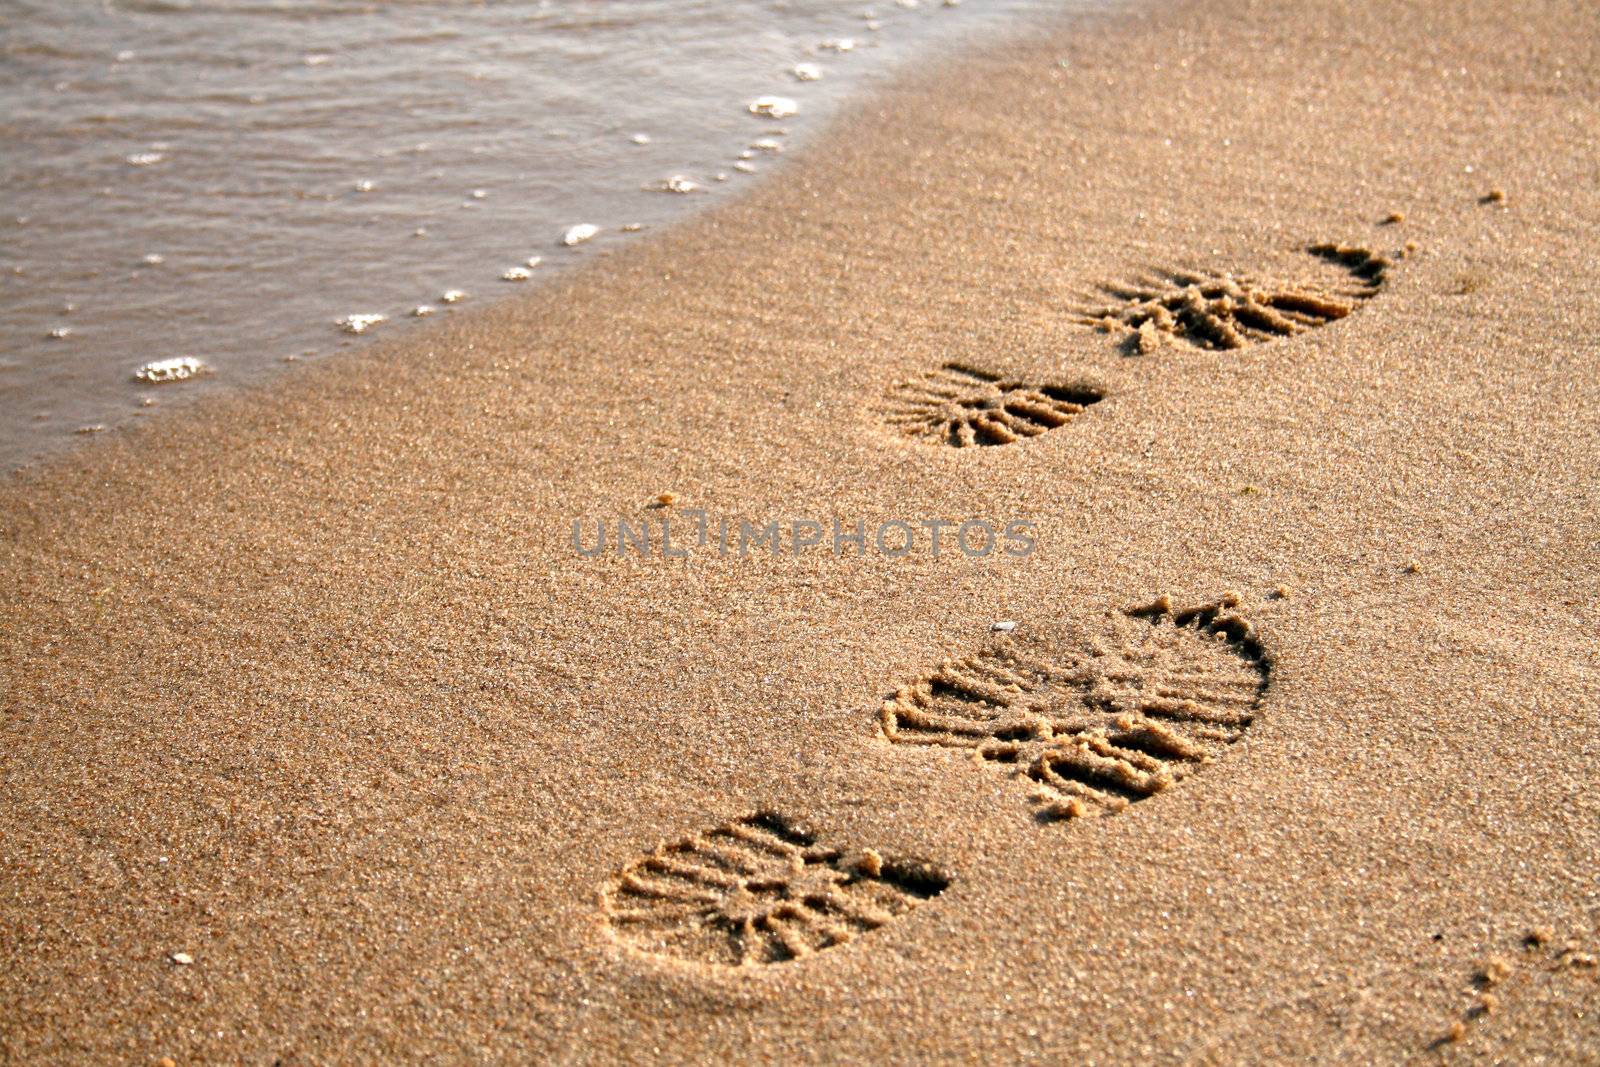 Footprints on the sand near the waves